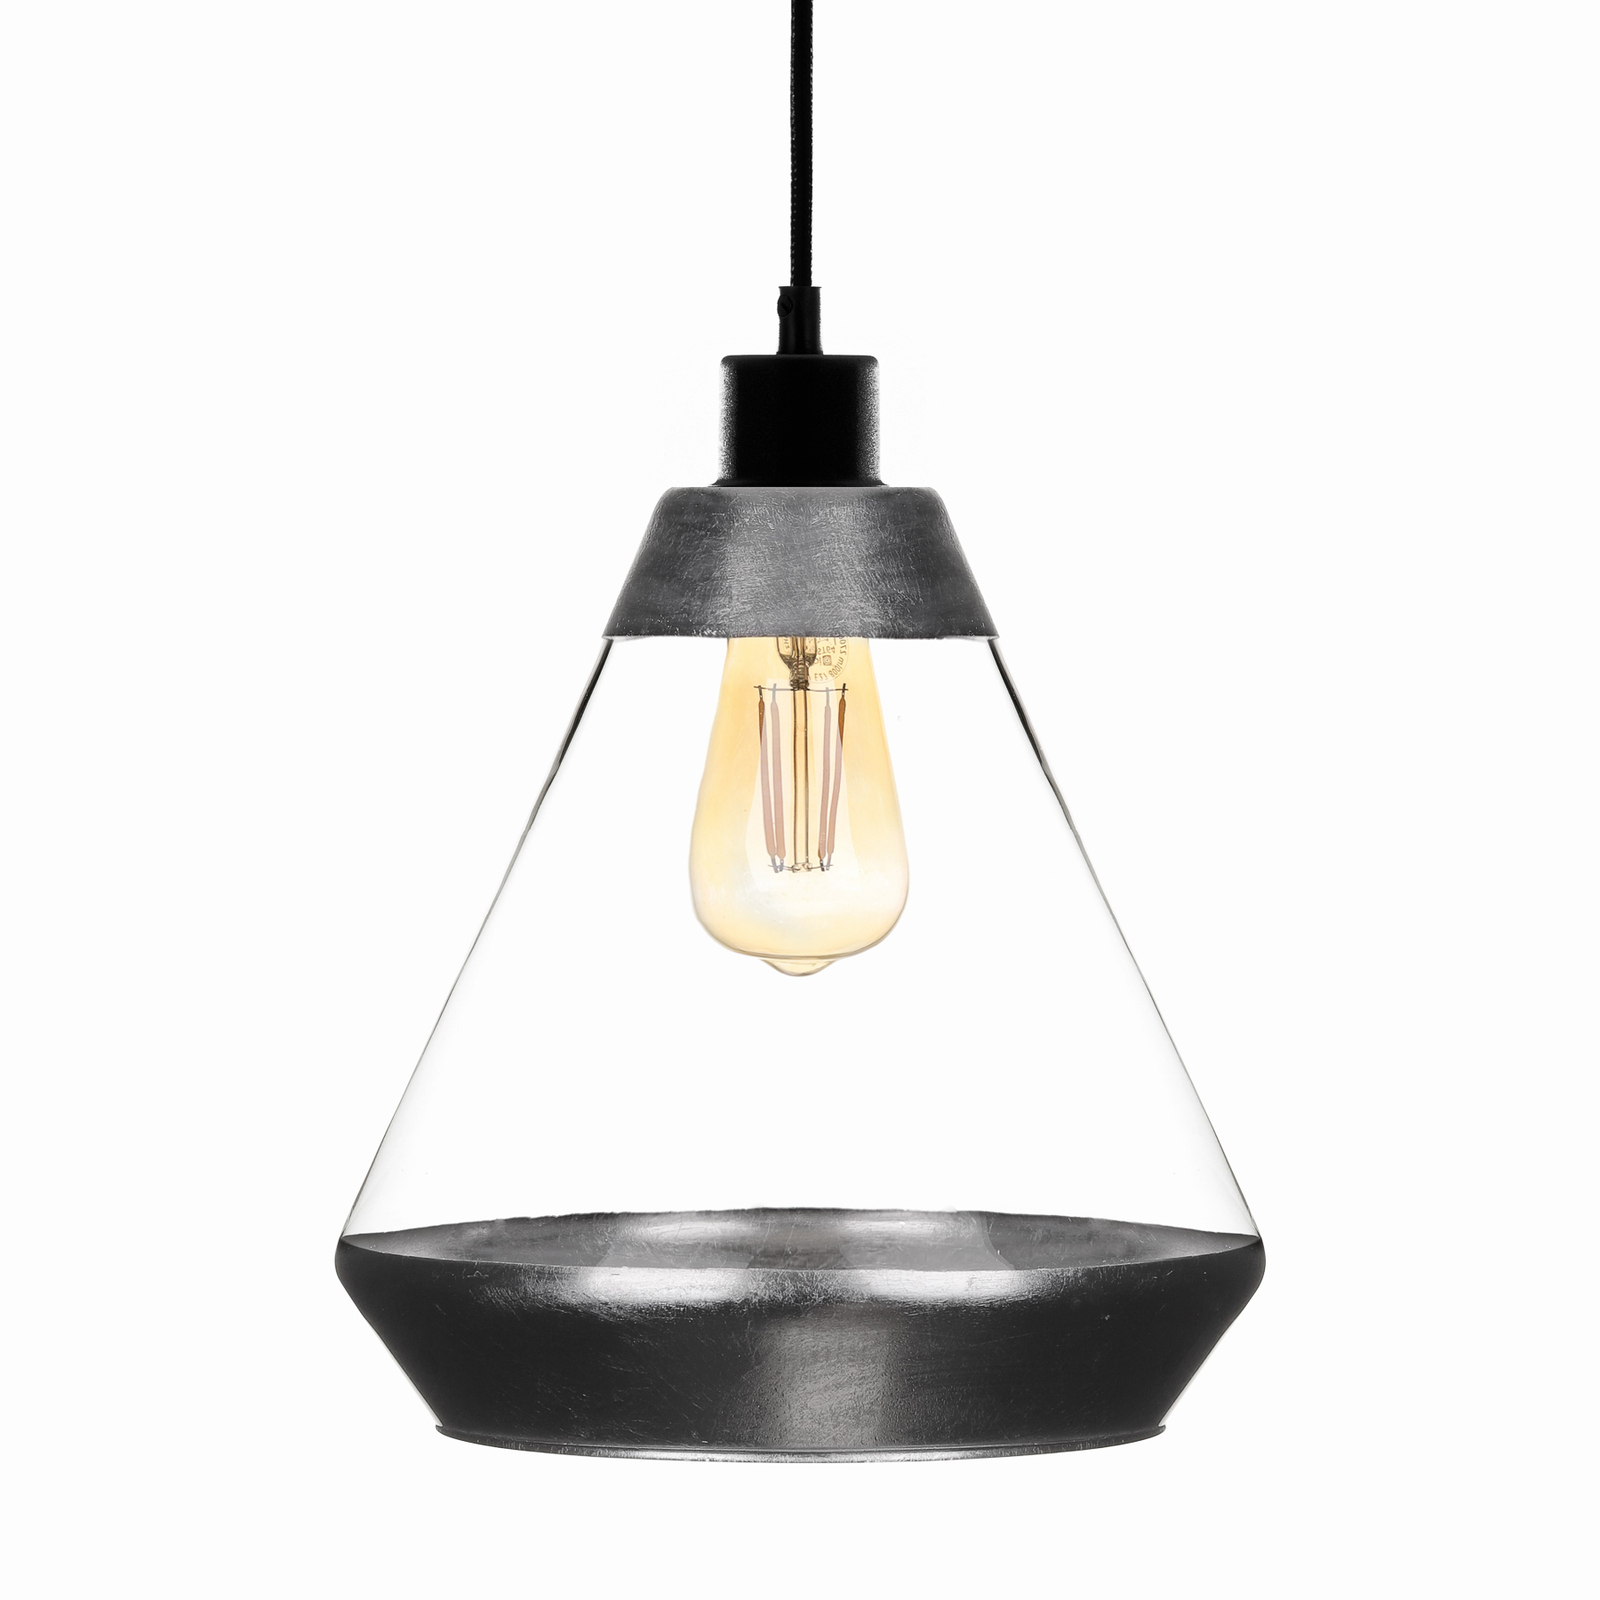 Lonceng pendant light made of glass, silver décor